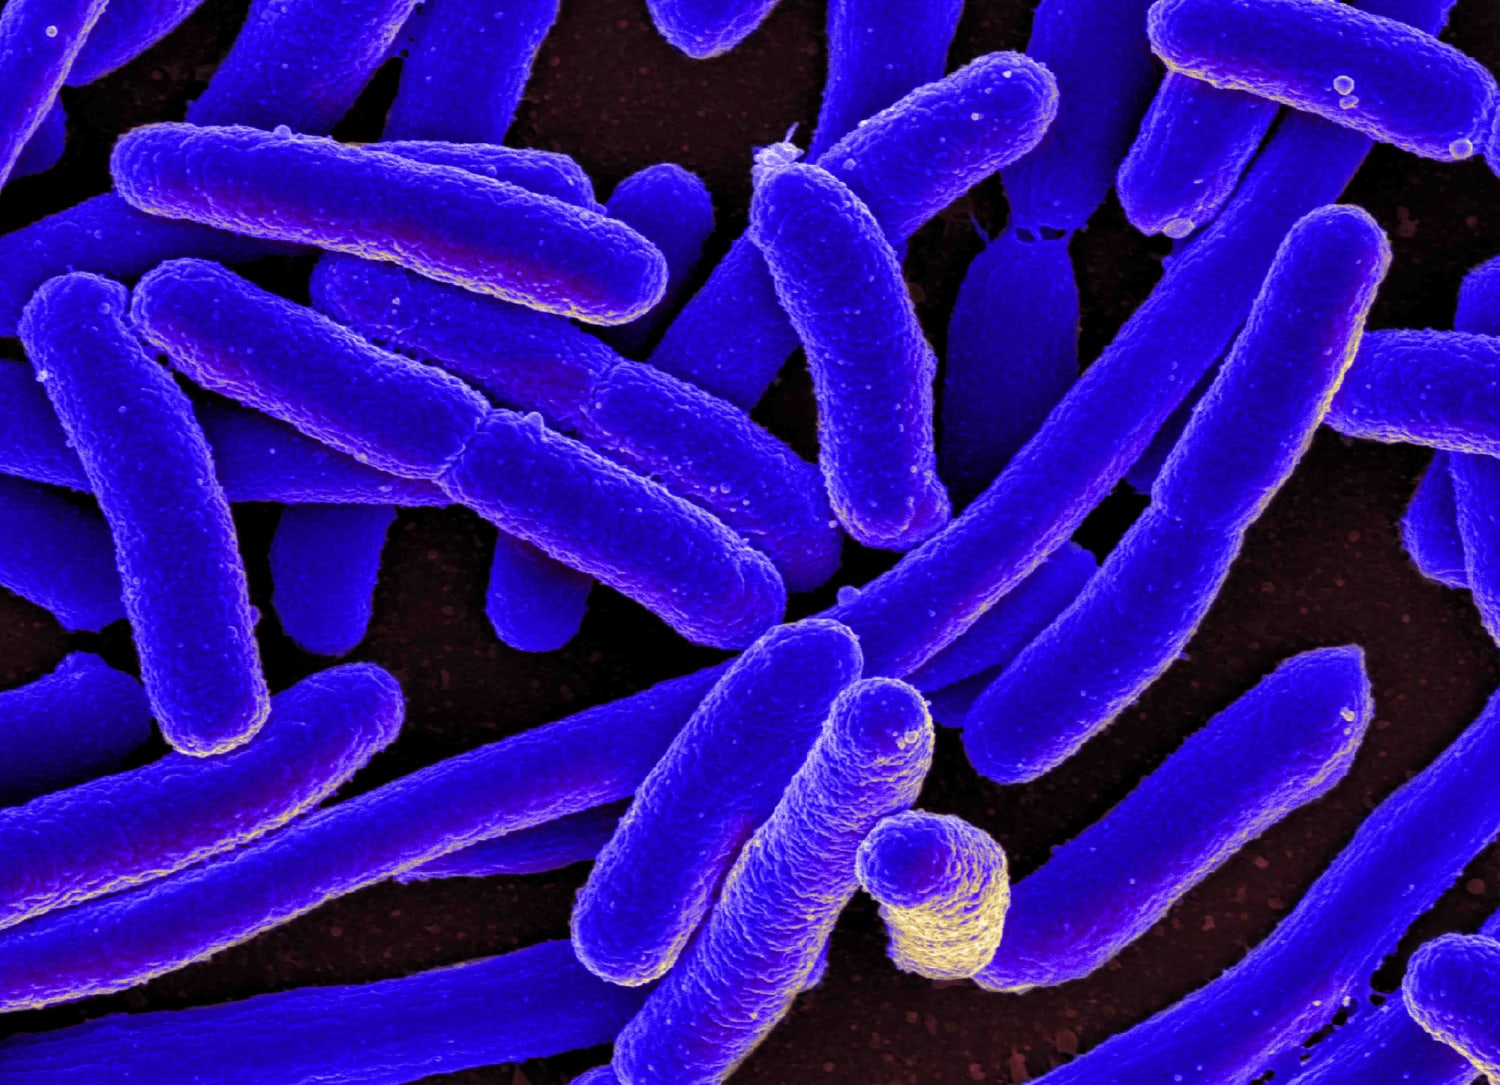 E. coli outbreak extends to New York and Kentucky